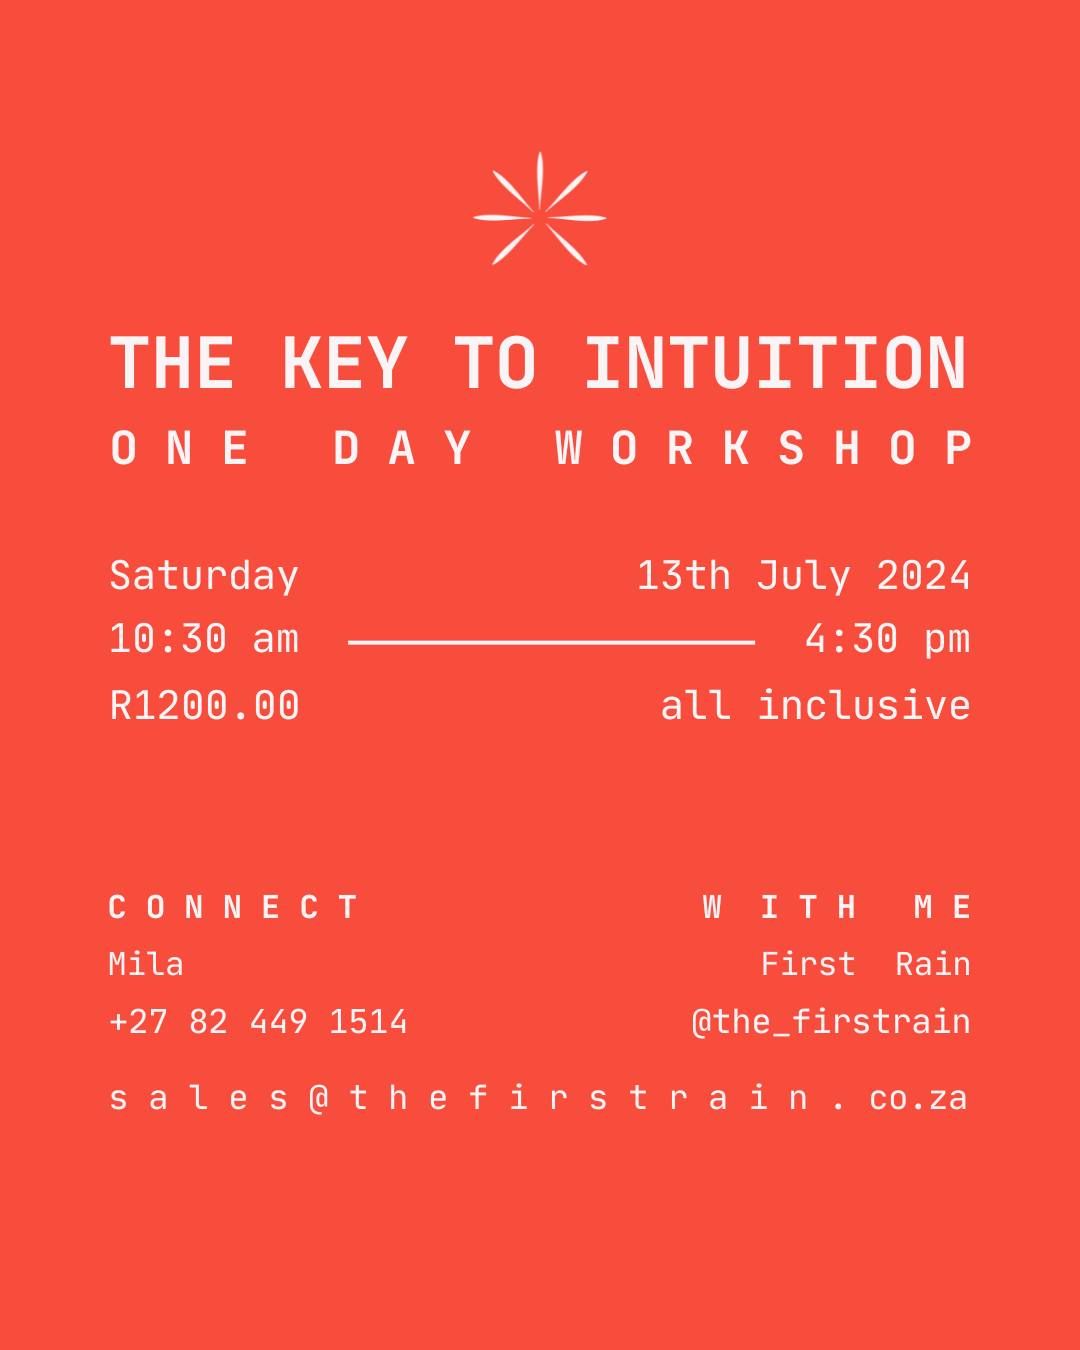 The Key to Intuition - One Day Workshop